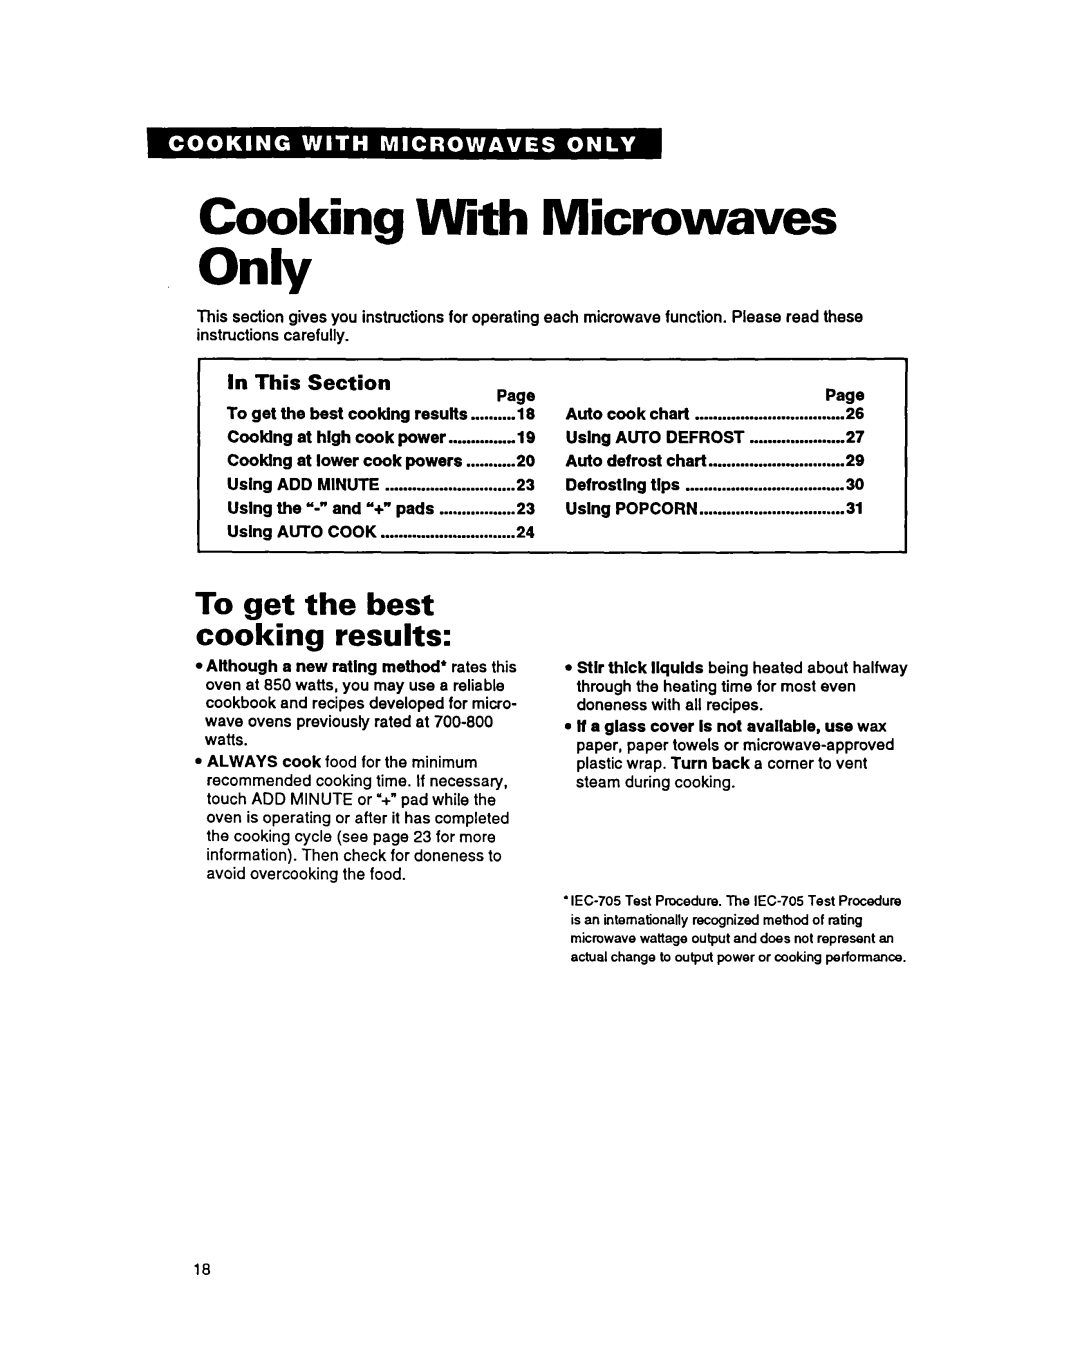 Whirlpool MG3090XAB, MG207OXAQ, MG207OXAB OnrY, Cooking vvith Microwaves, To get the best cooking results, In This, Section 